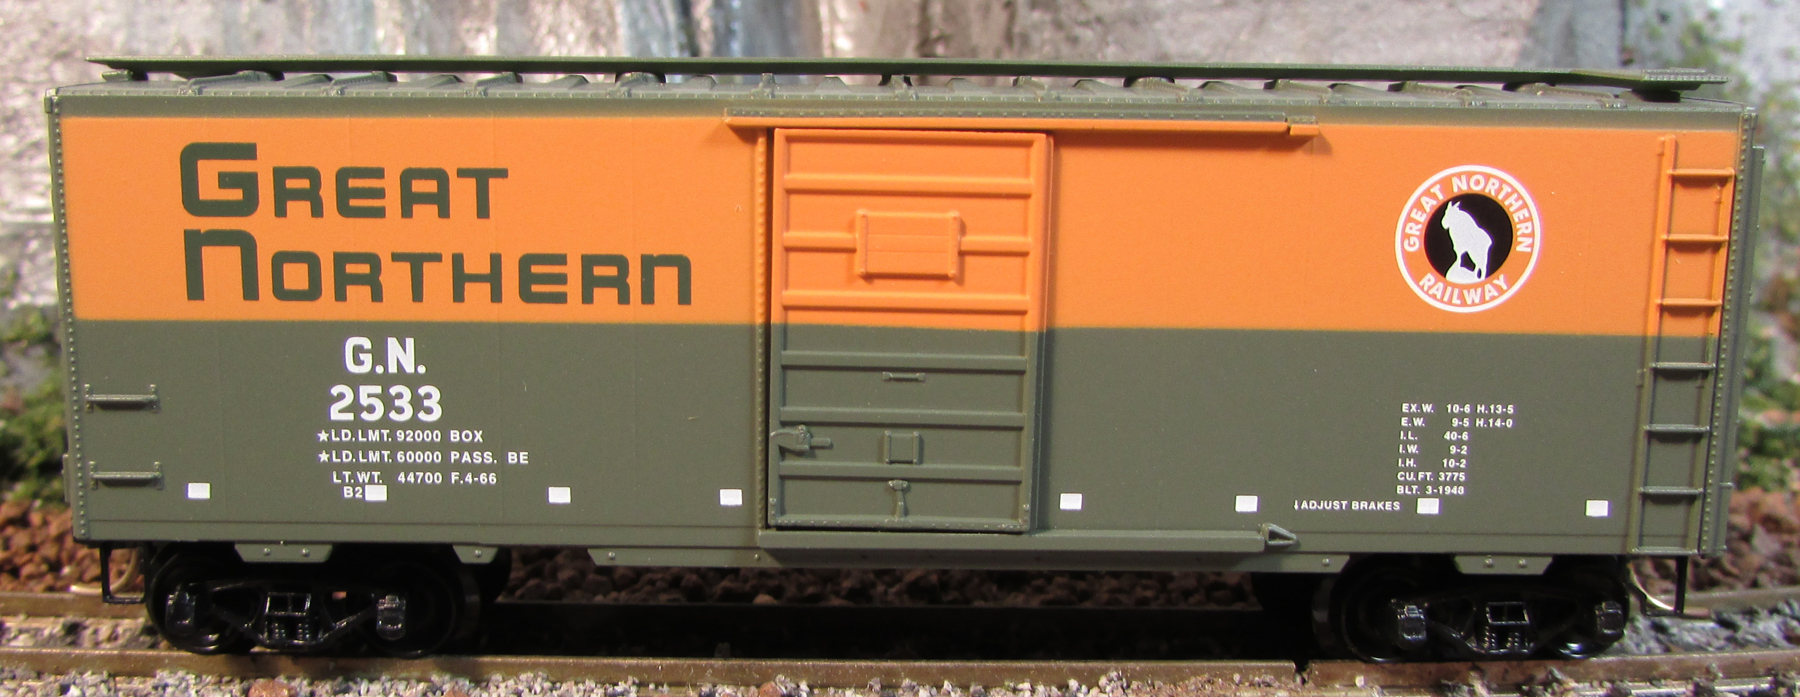 Great Northern  12 Panel 40 ft Box Car  Intermountain  61015  N-scale 